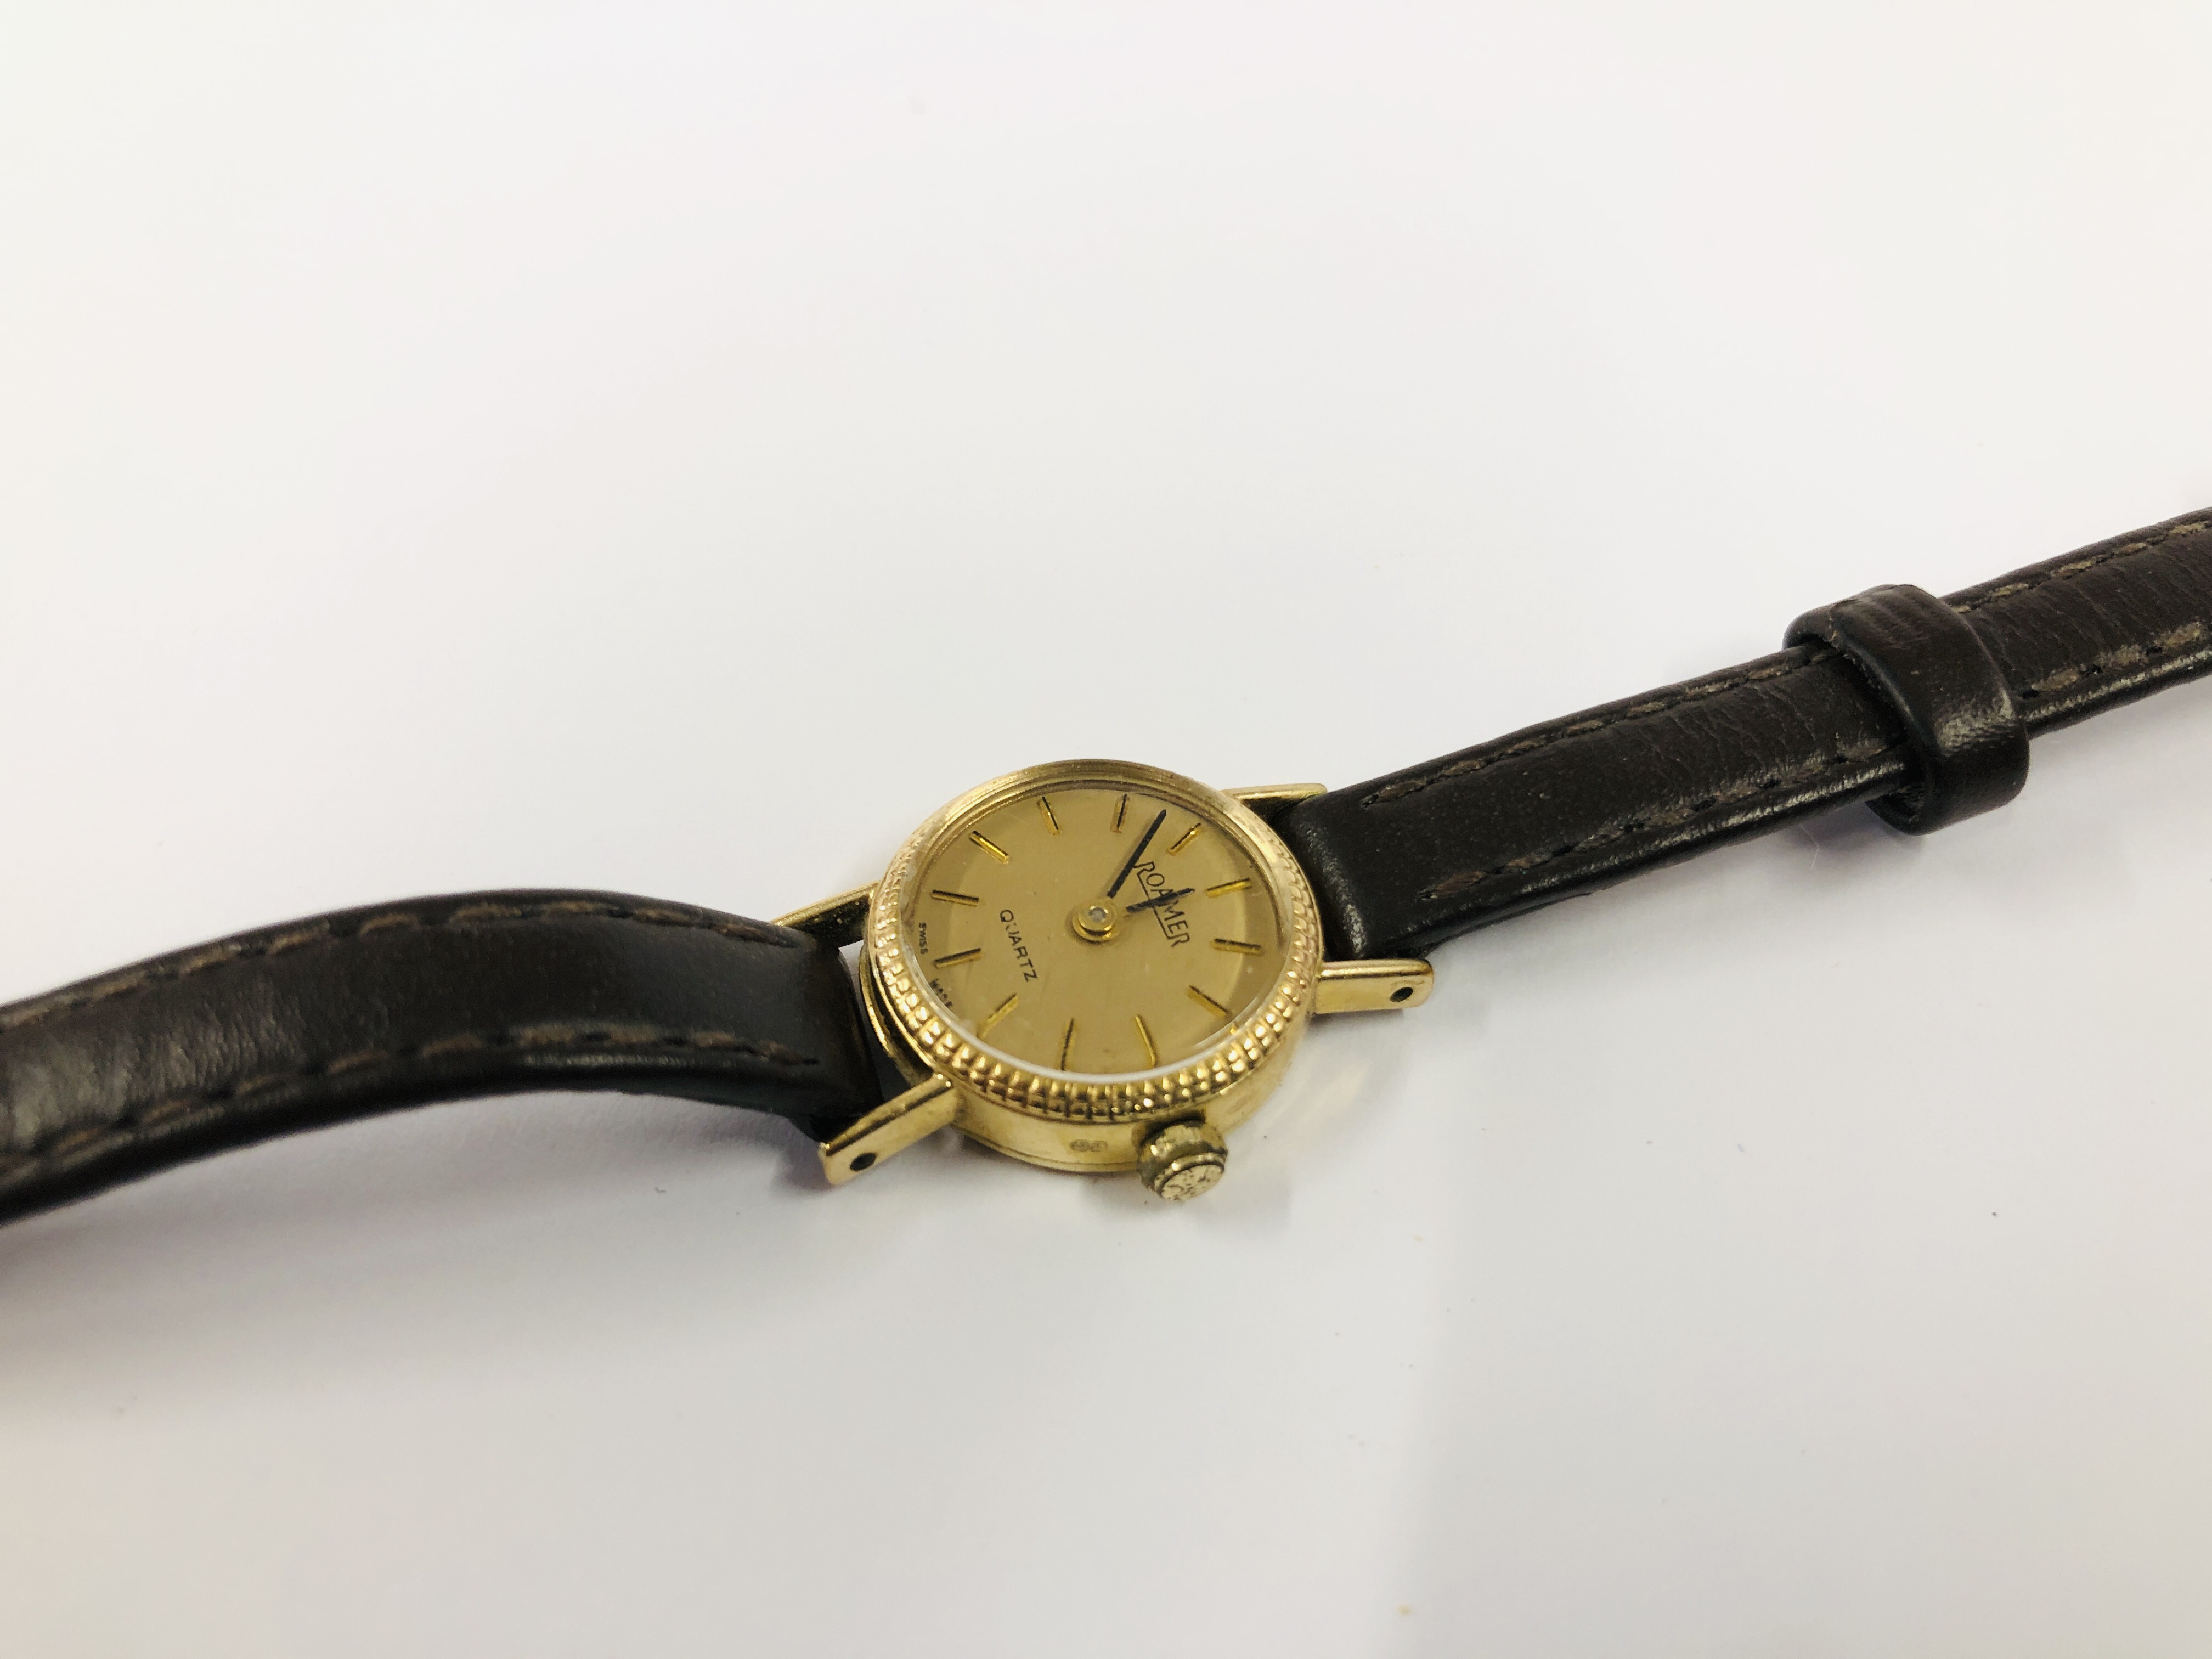 LADIES ROAMER 9CT GOLD CASED WRIST WATCH ON A BROWN LEATHER STRAP. - Image 2 of 12